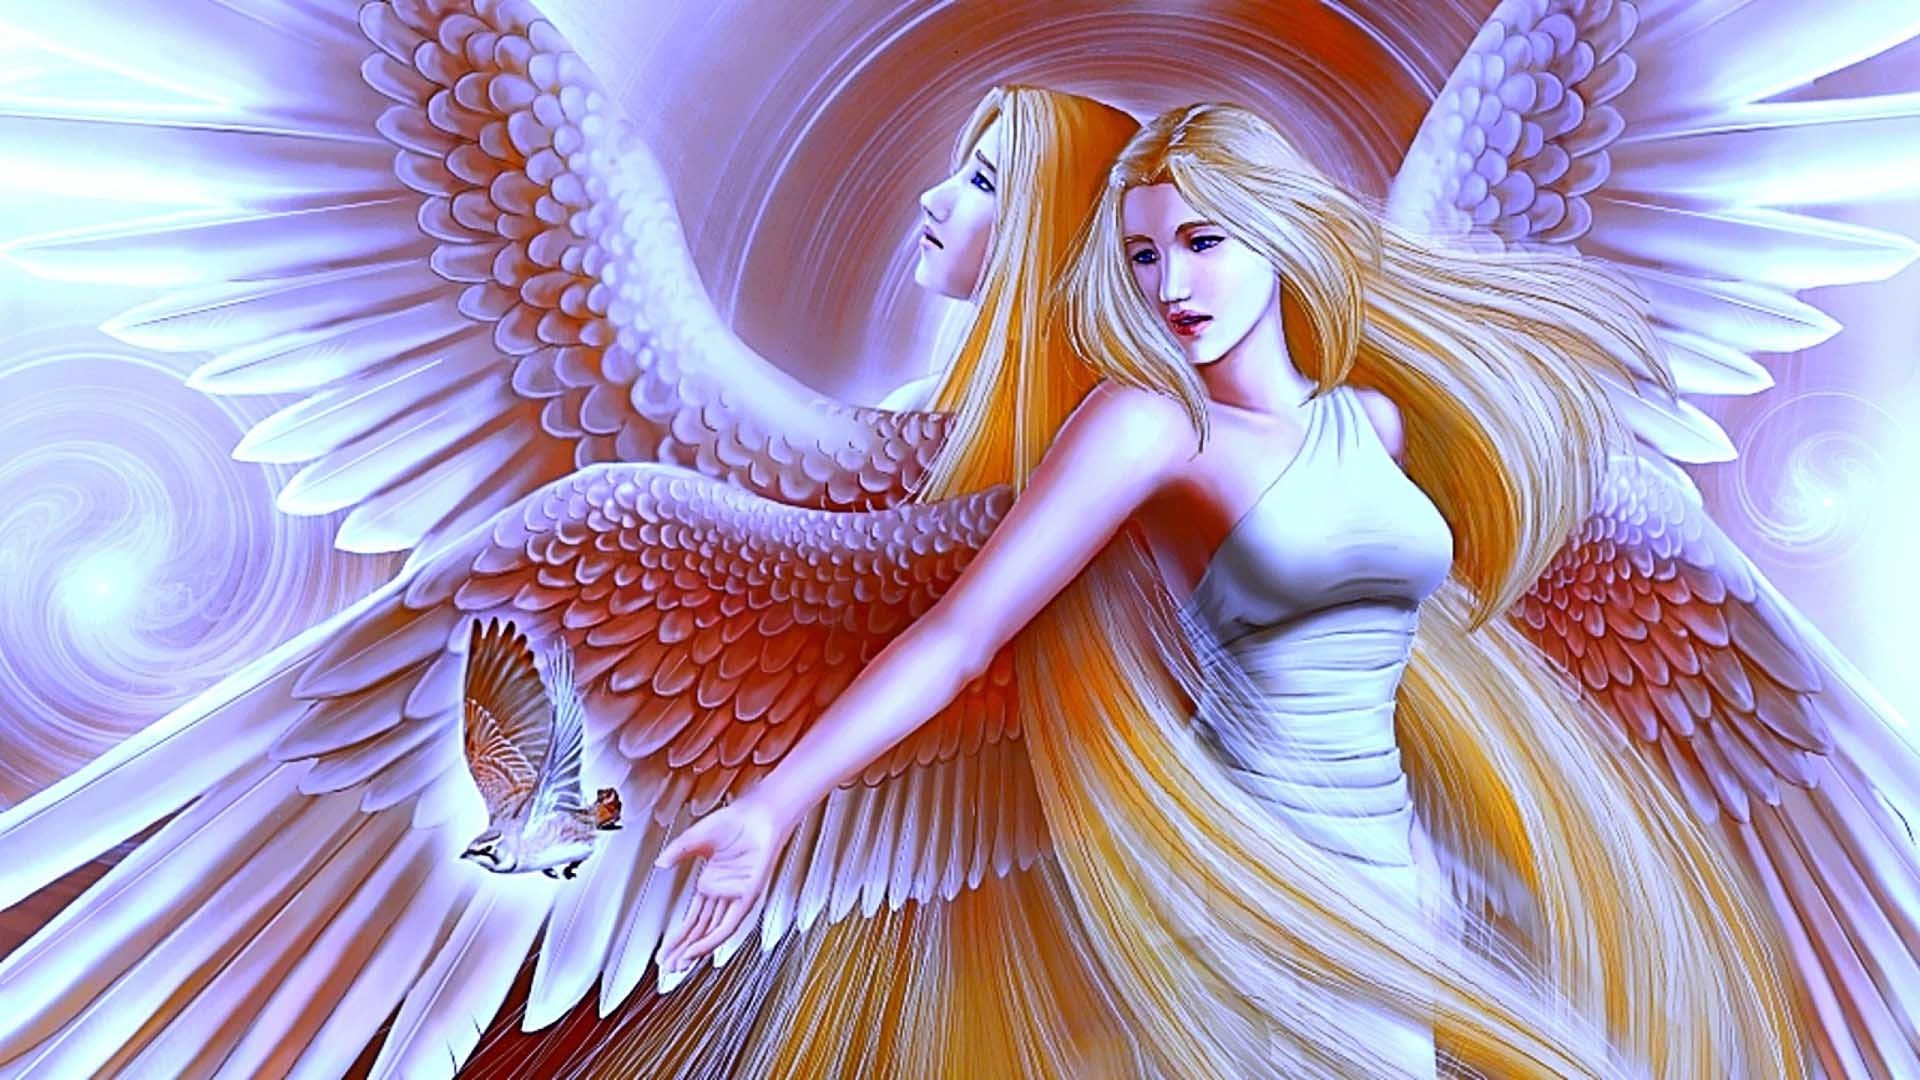 1920x1080 Free Angel Wallpaper Download | Adorable Wallpapers | Pinterest | Angel  wallpaper, Wallpaper and Angel